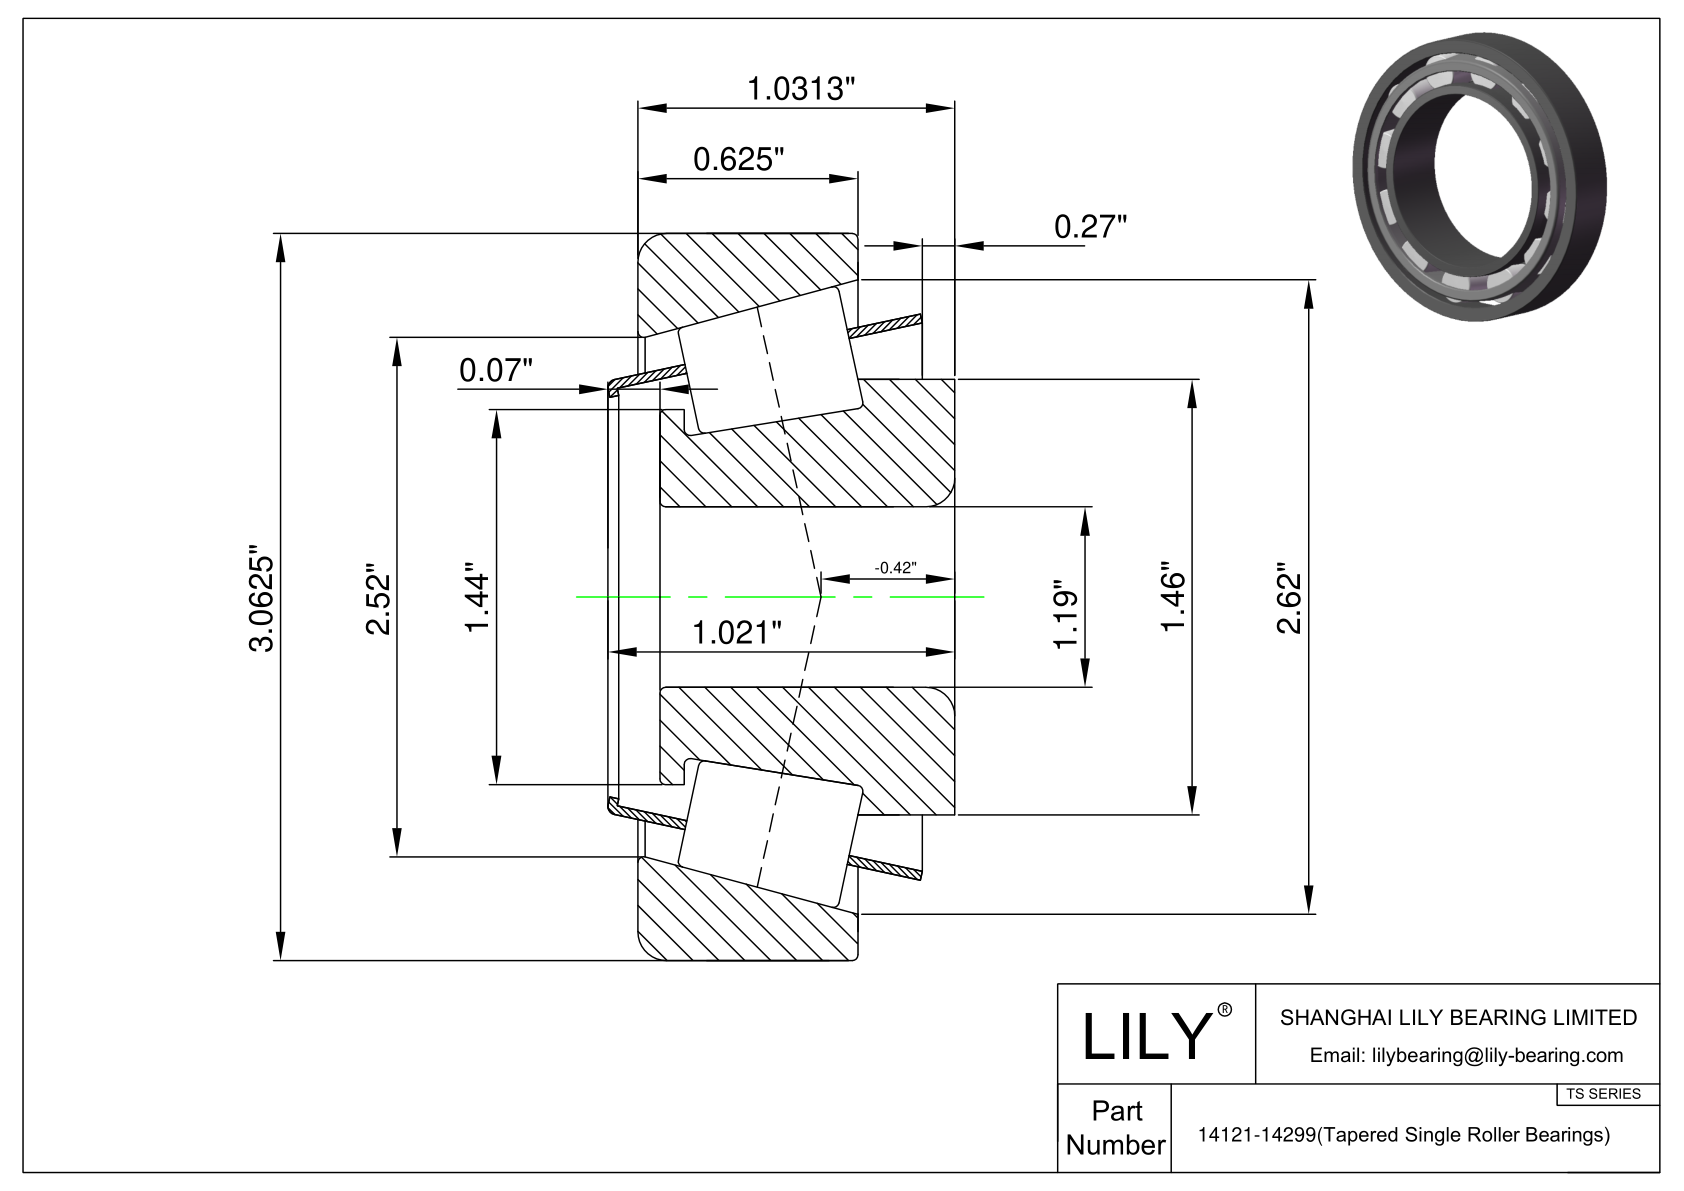 14121-14299 TS (Tapered Single Roller Bearings) (Imperial) cad drawing